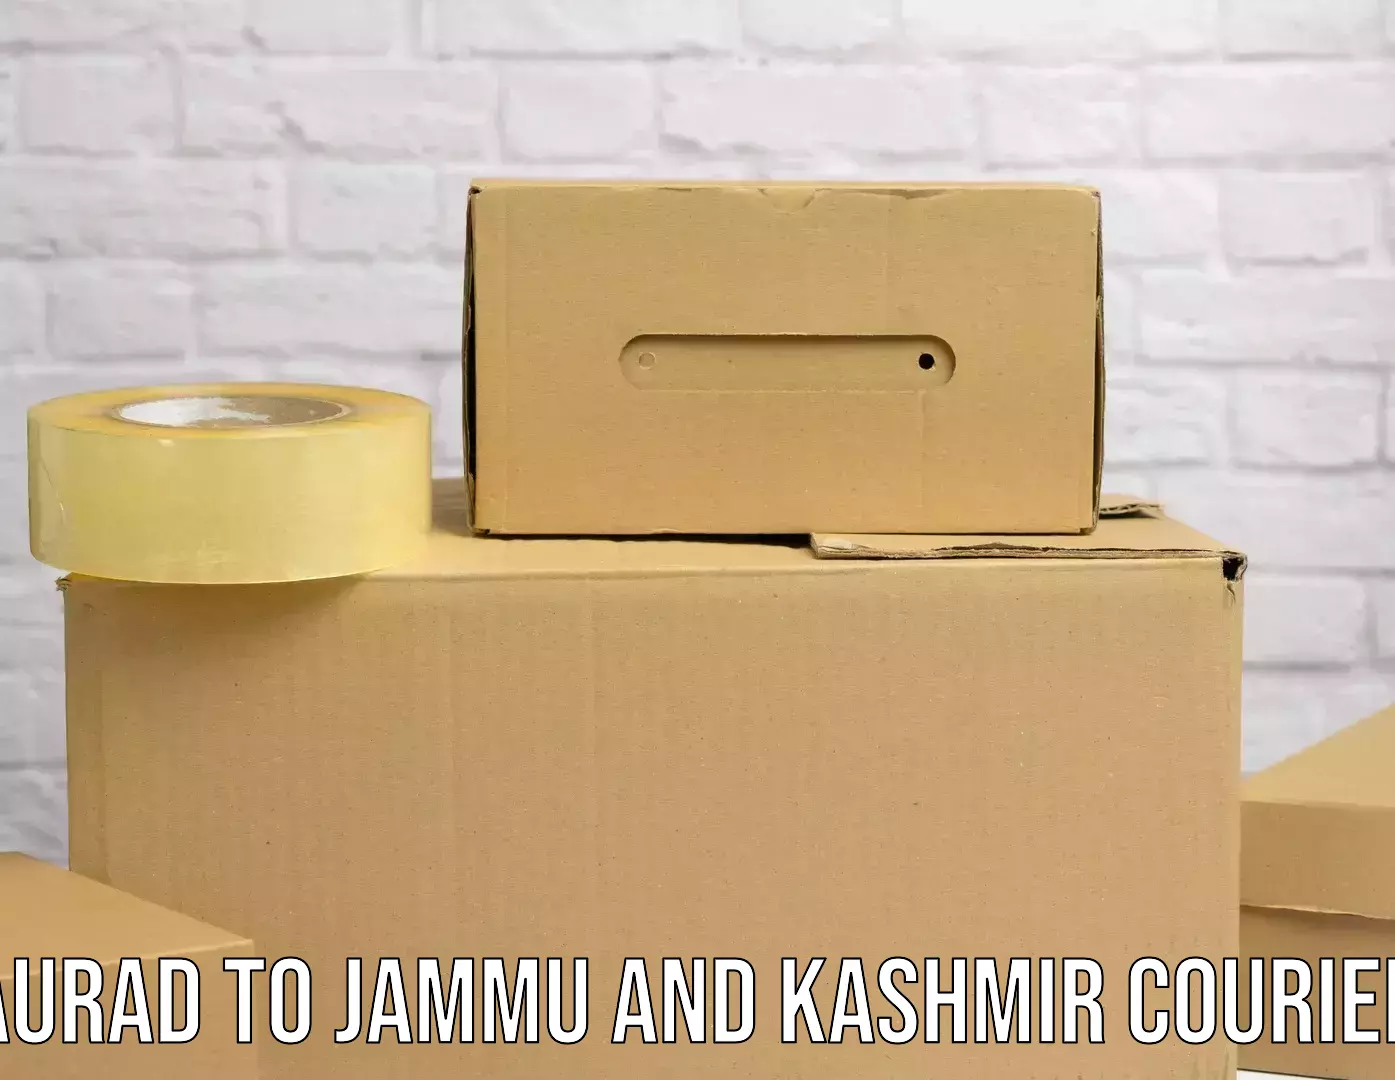 Full-service courier options Aurad to University of Jammu